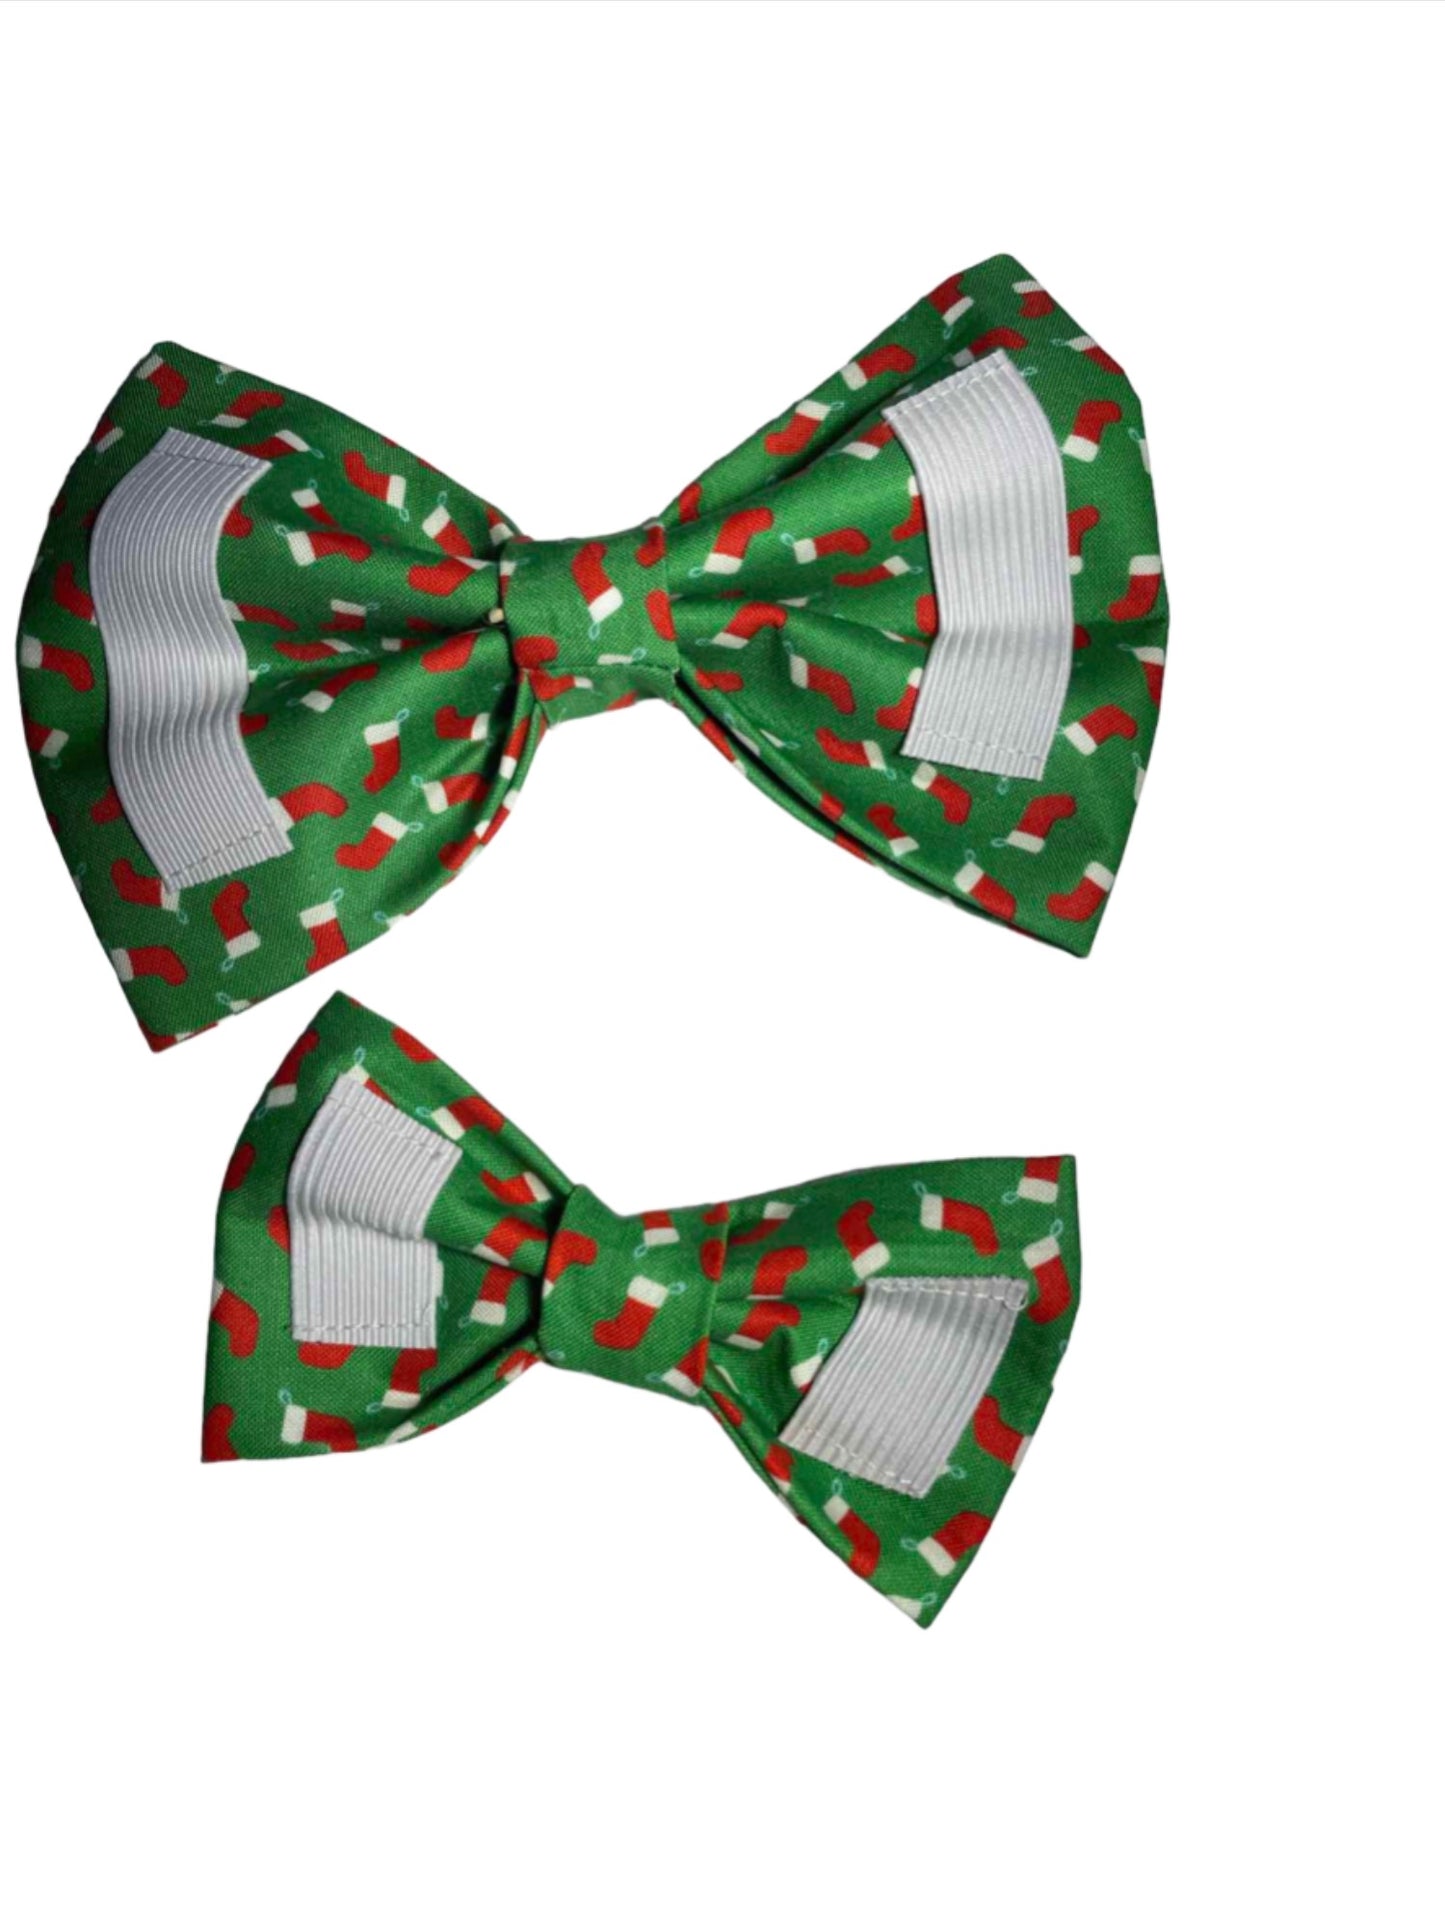 Stockings on Green Bow Tie